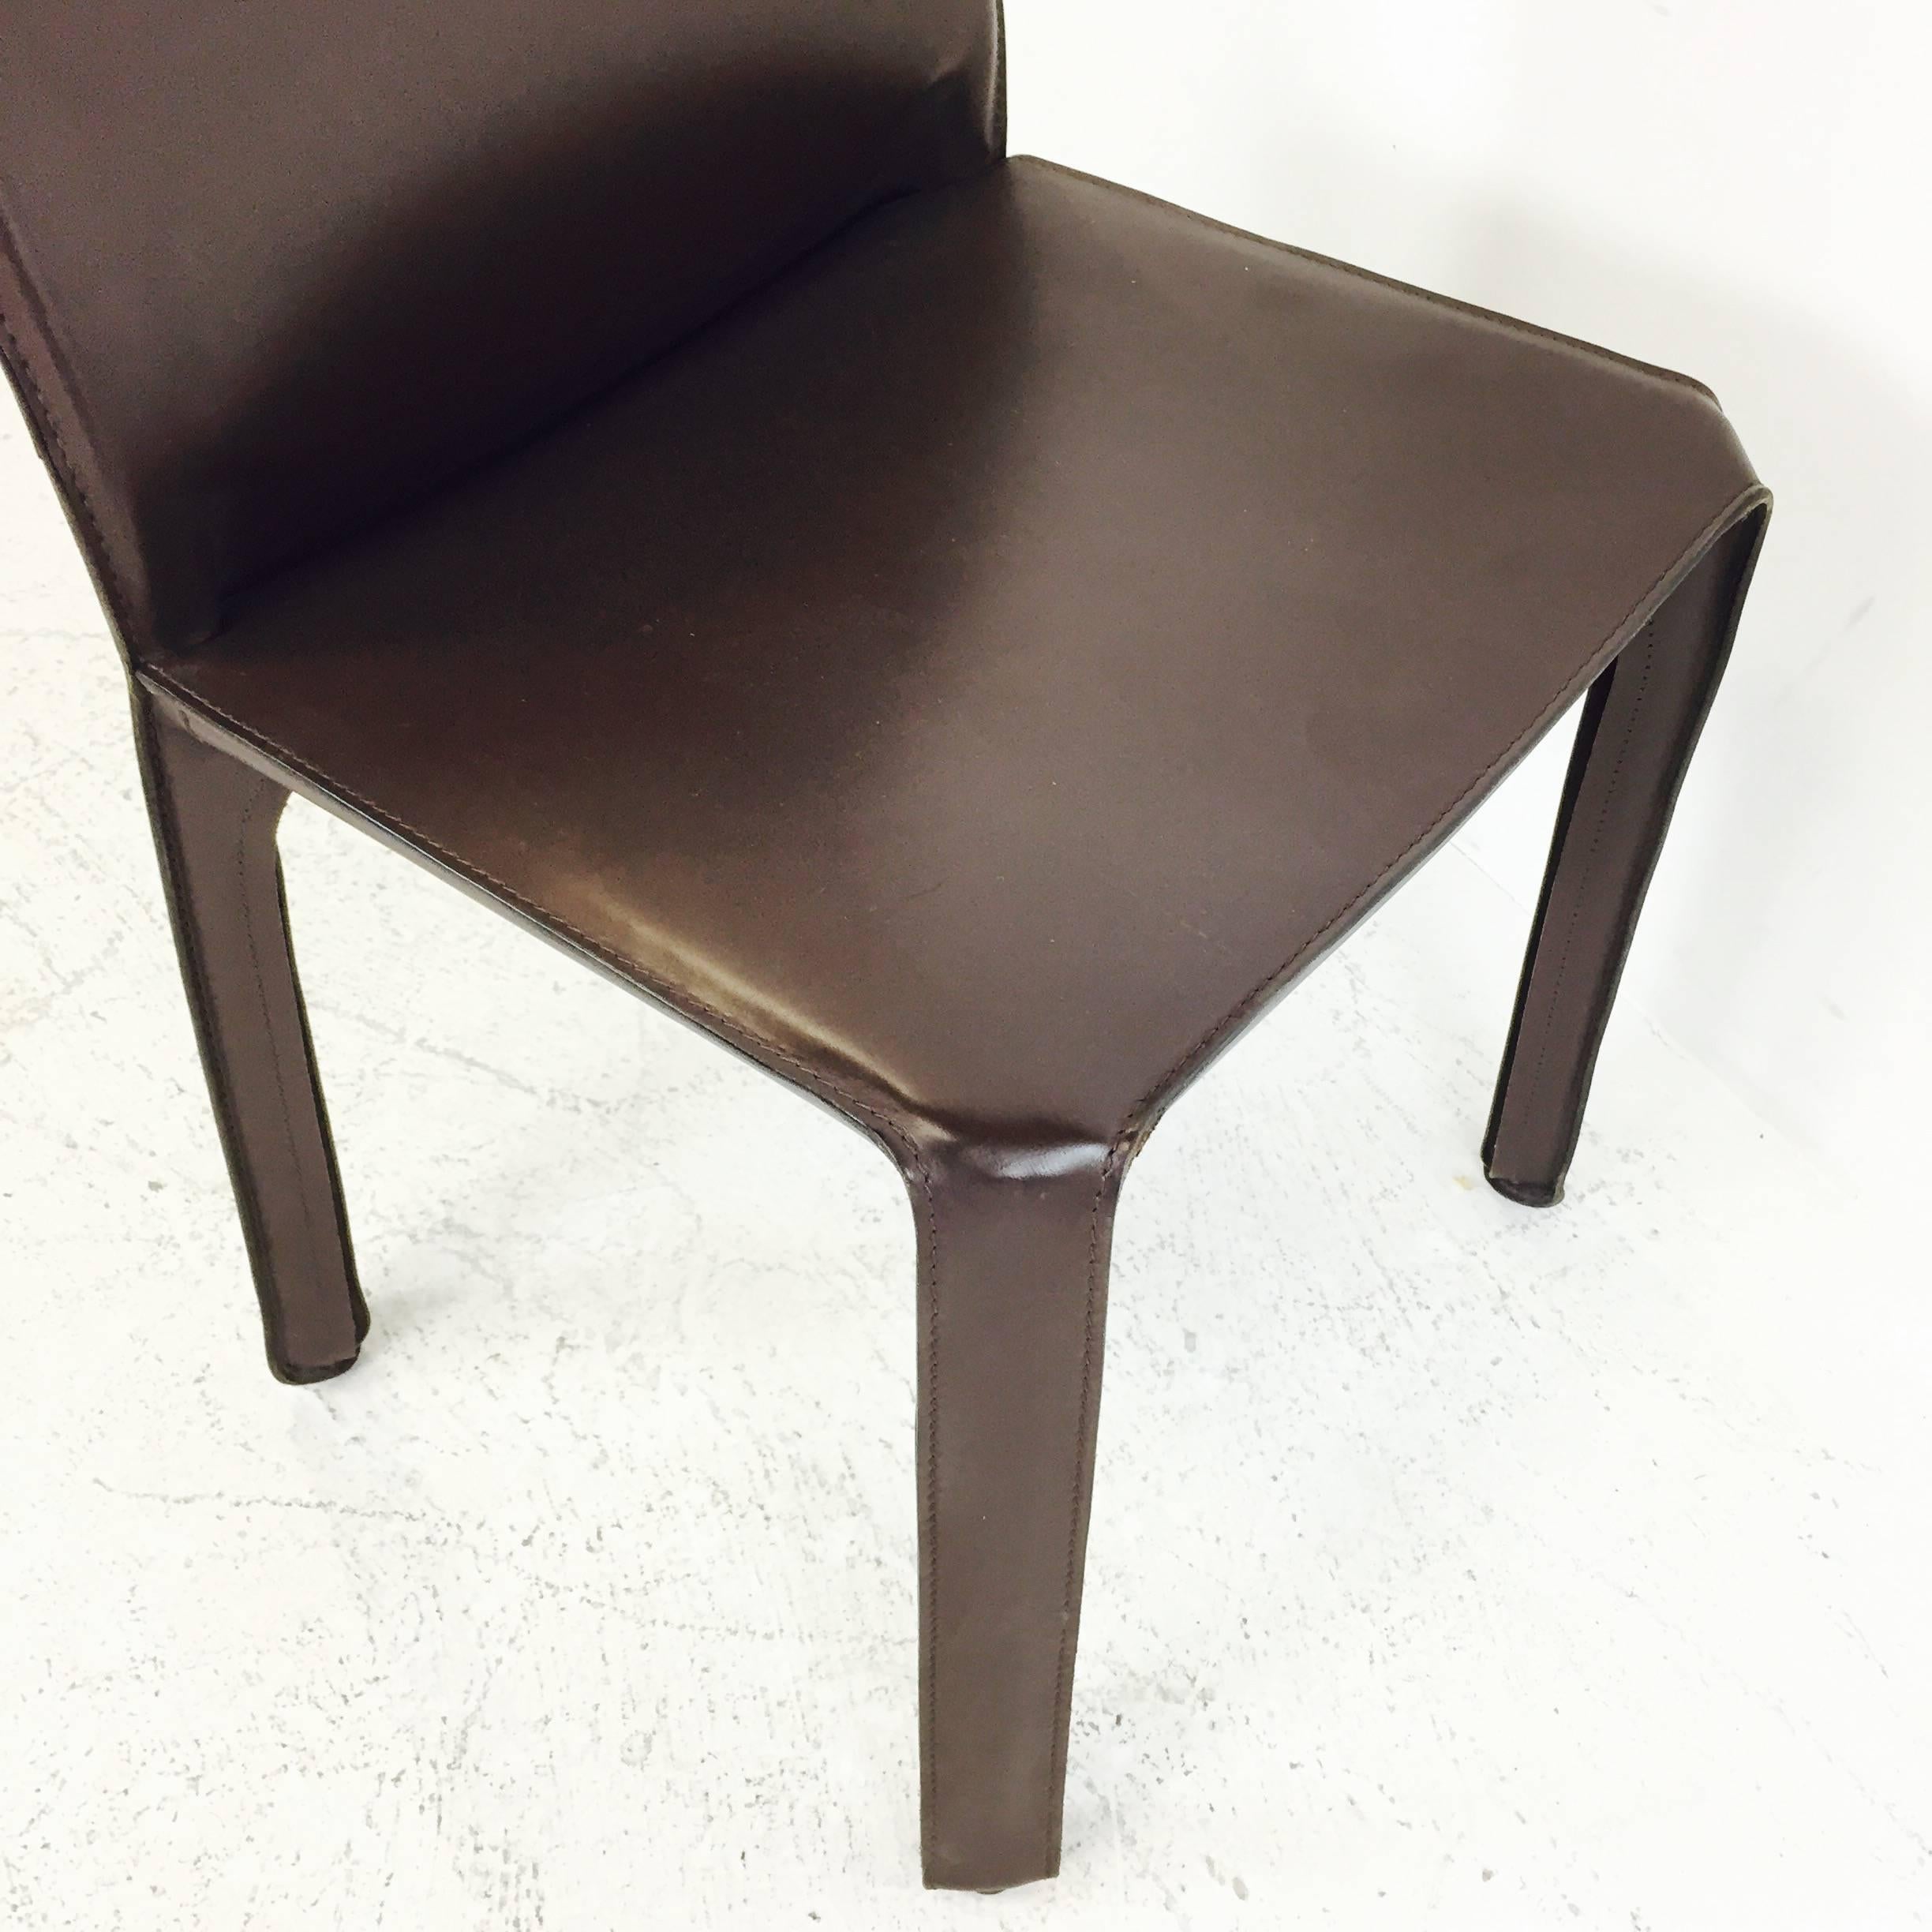 20th Century Espresso Brown Mario Bellini Cab Leather Dining Chairs (3 Available)